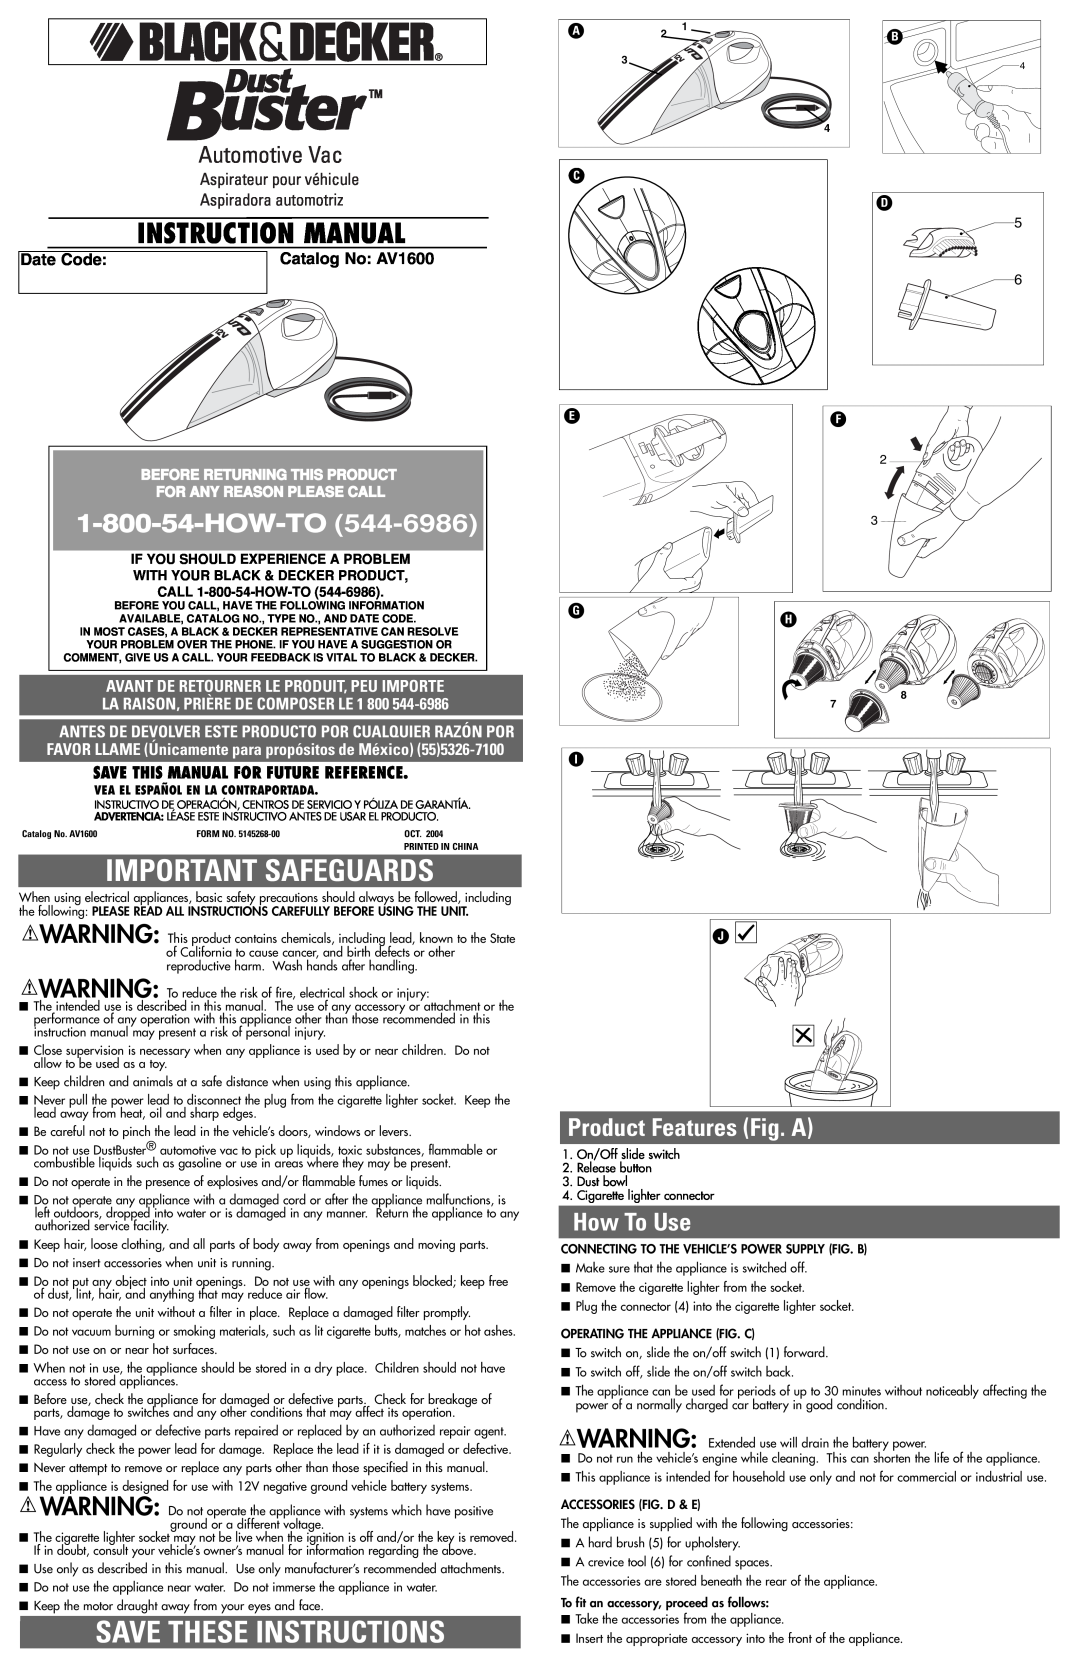 Black & Decker AV1600 instruction manual Important Safeguards, Save These Instructions, Product Features Fig. A, How-To 